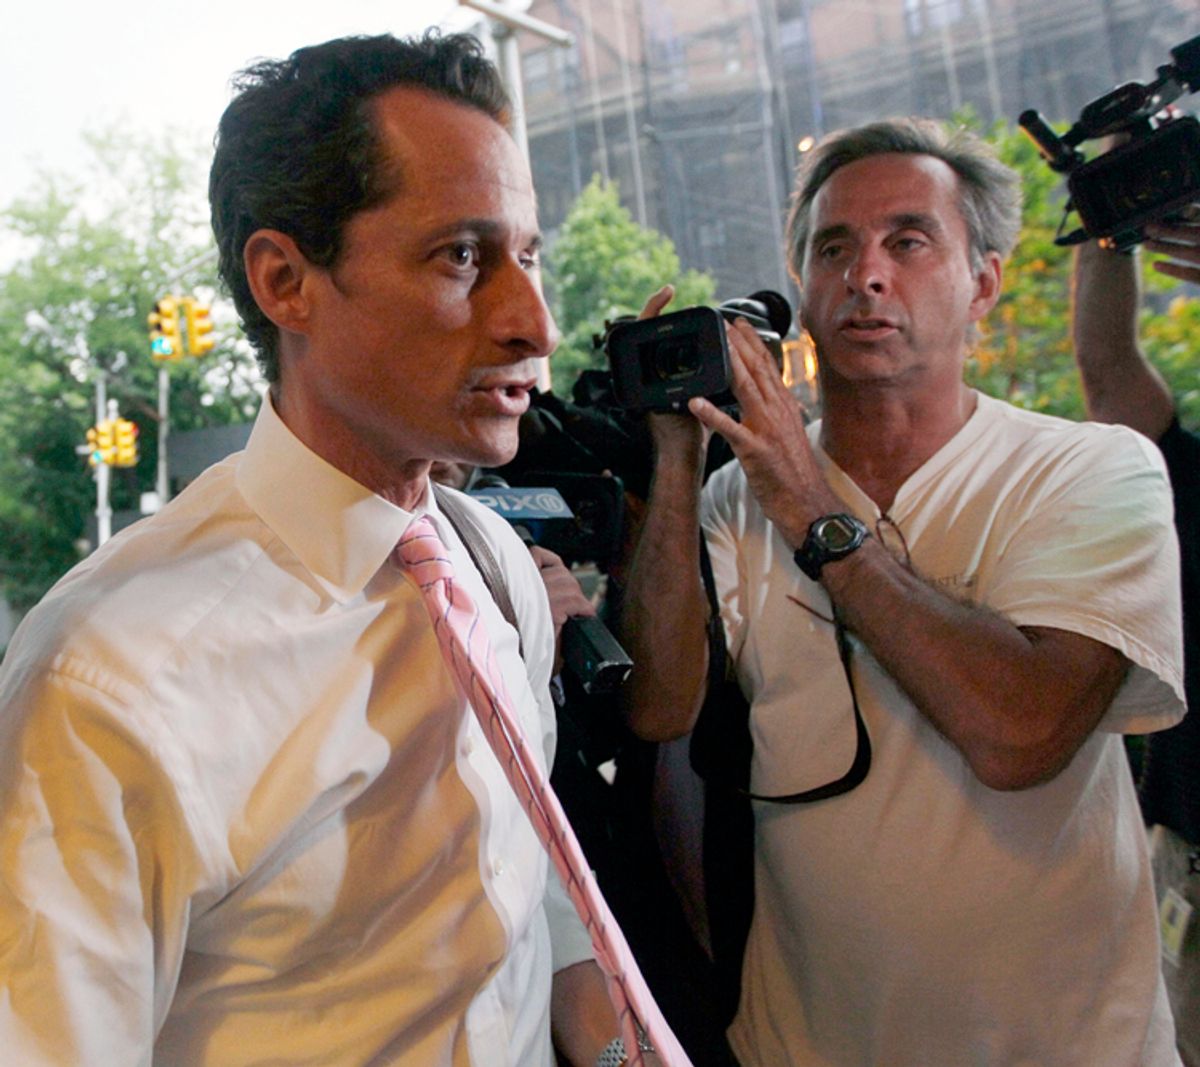 Rep. Anthony Weiner, D-N.Y., is surrounded by reporters as he arrives at his house in the Queens borough of New York,  Thursday, June 9, 2011. Weiner admitted four days ago that he had Tweeted sexually charged messages and photos to at least six women and lied about it.  (AP Photo/Mary Altaffer) (Mary Altaffer)